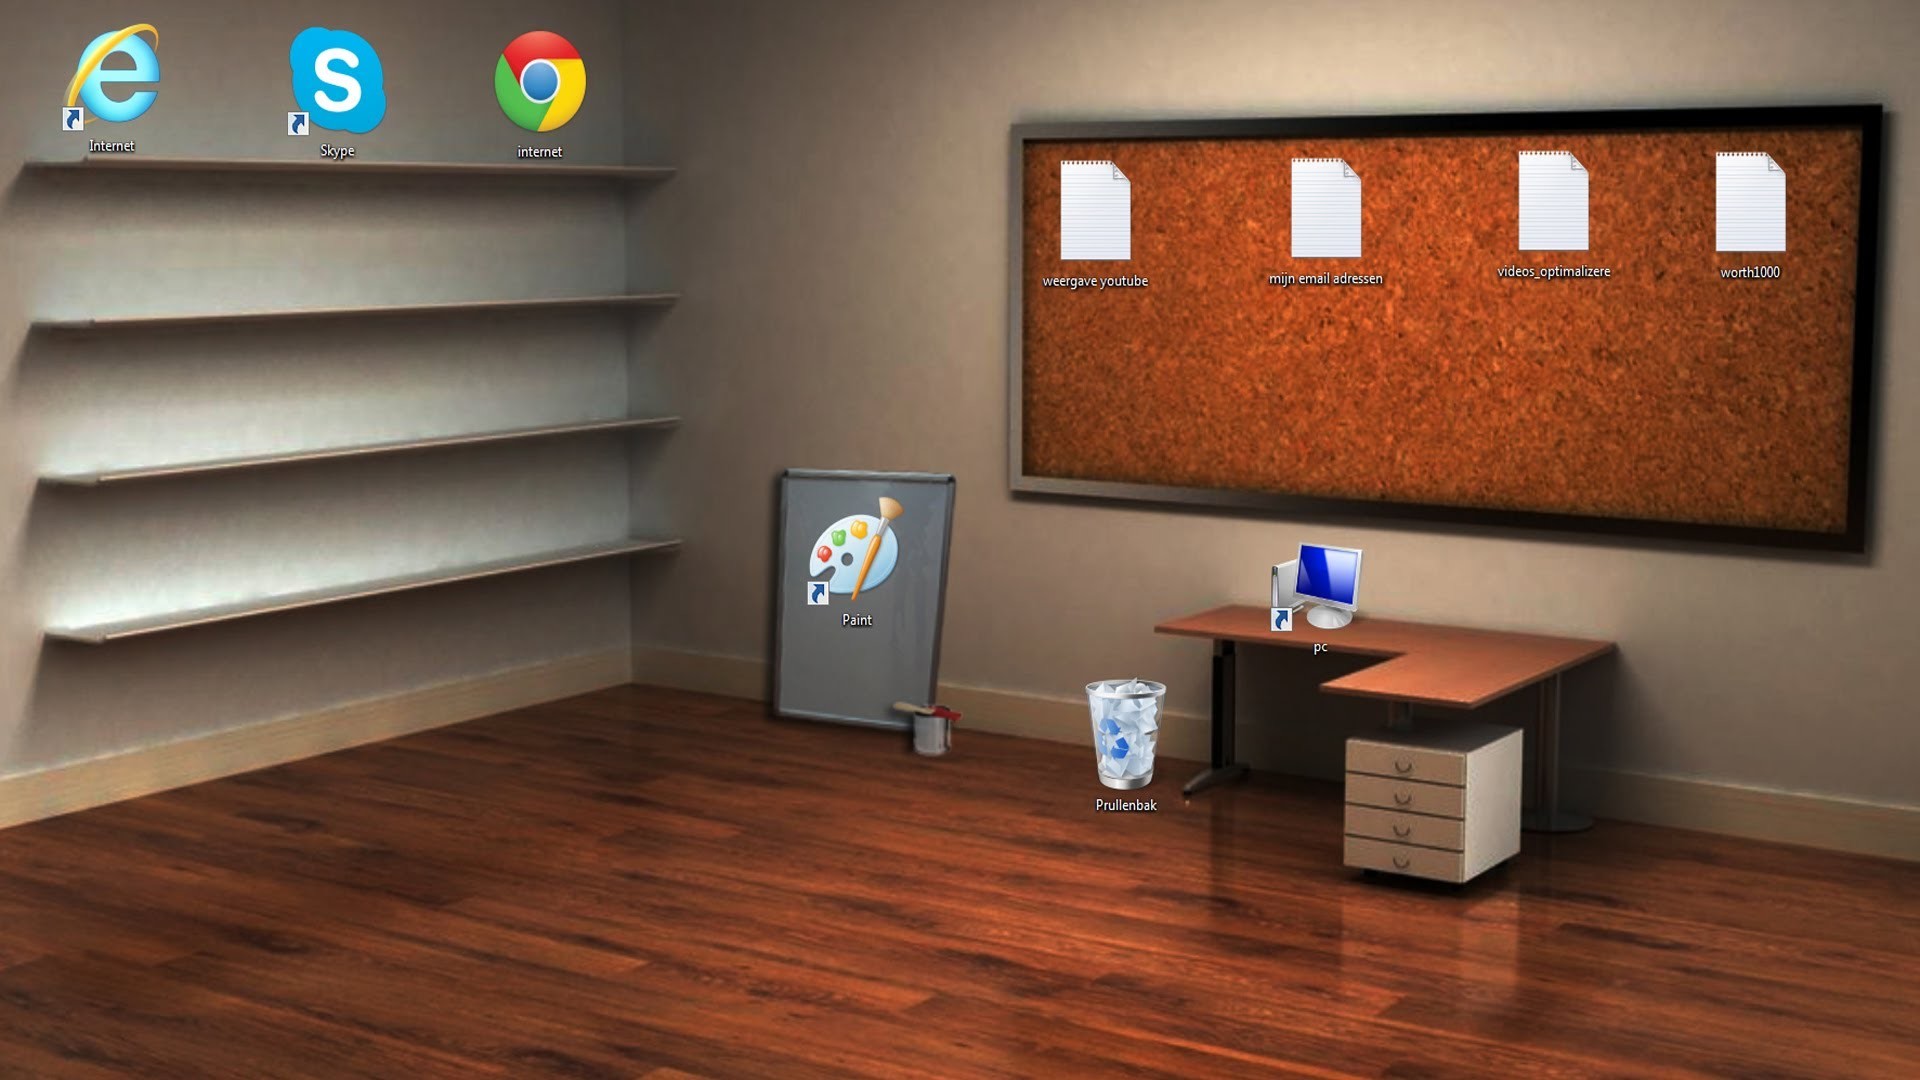 10 Choices desktop background that looks like an office You Can Save It ...